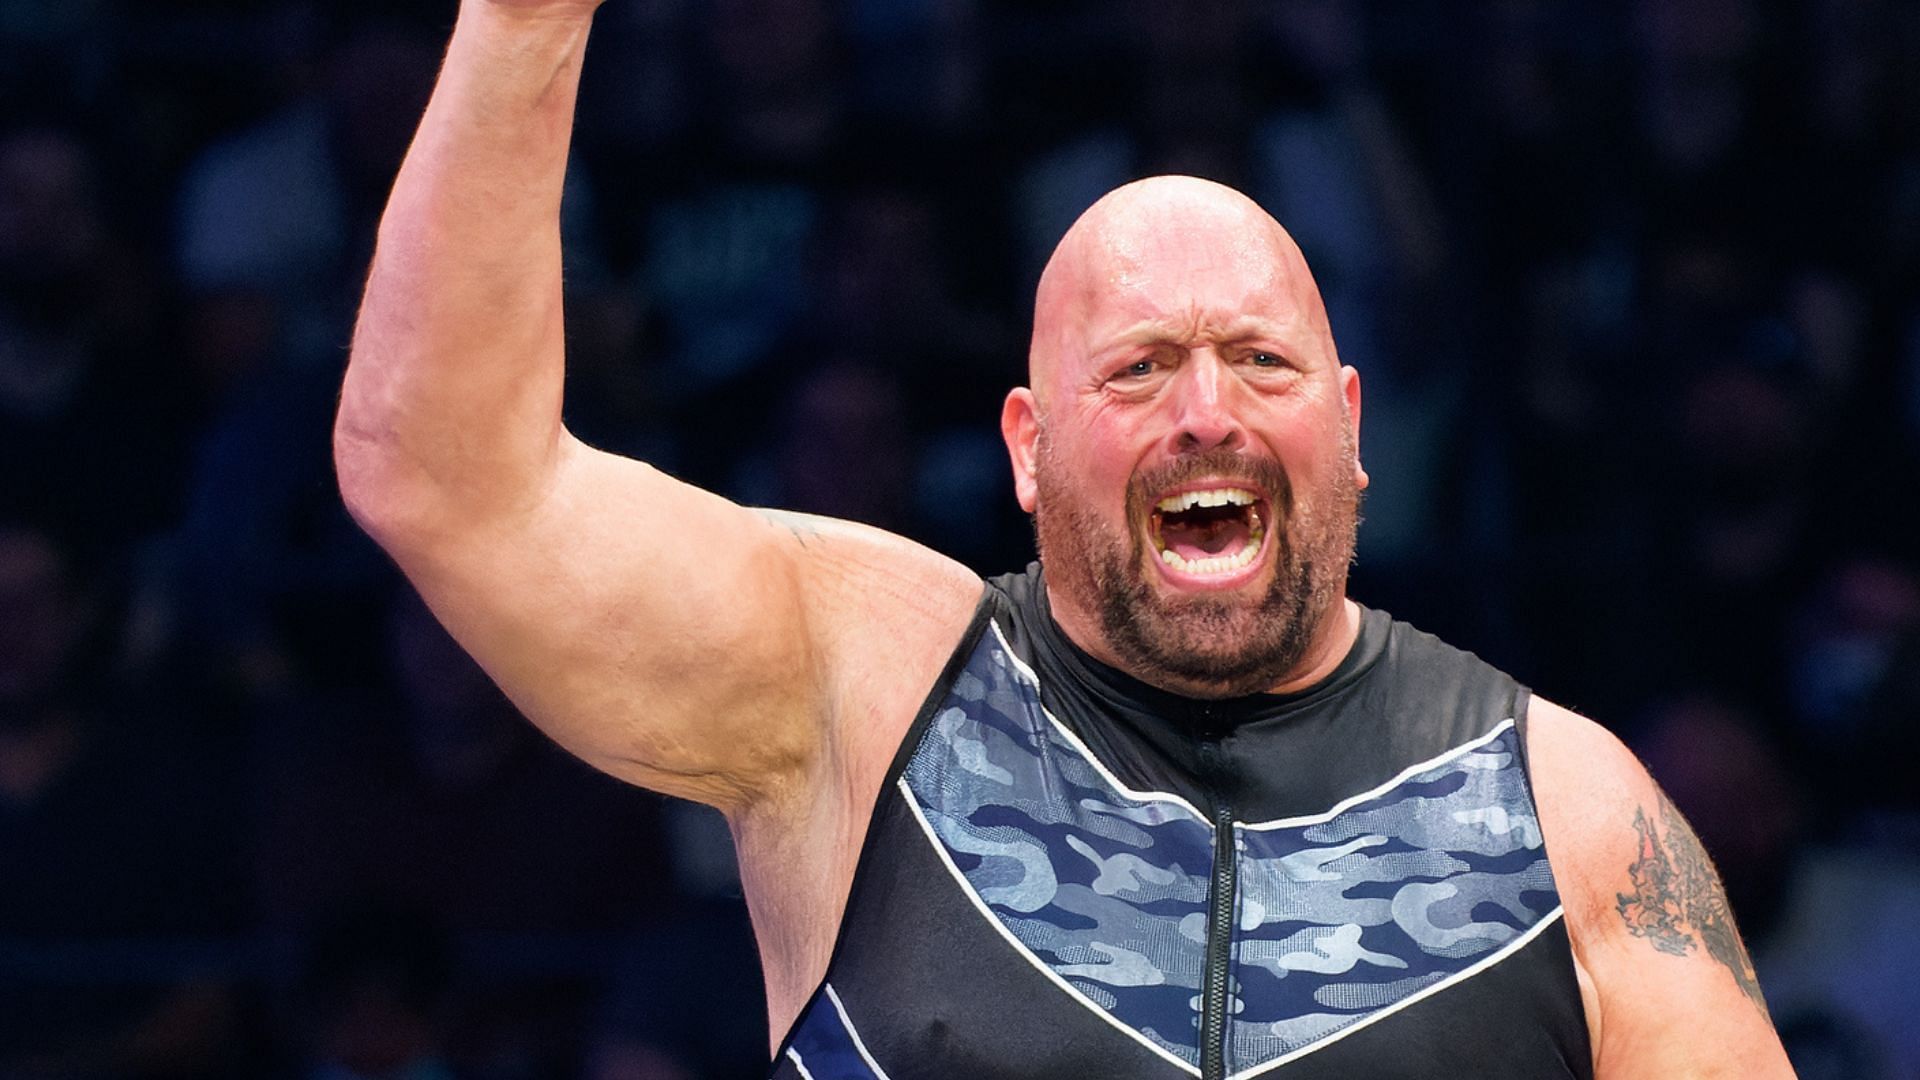 An AEW star claims they could chokeslam Paul Wight!